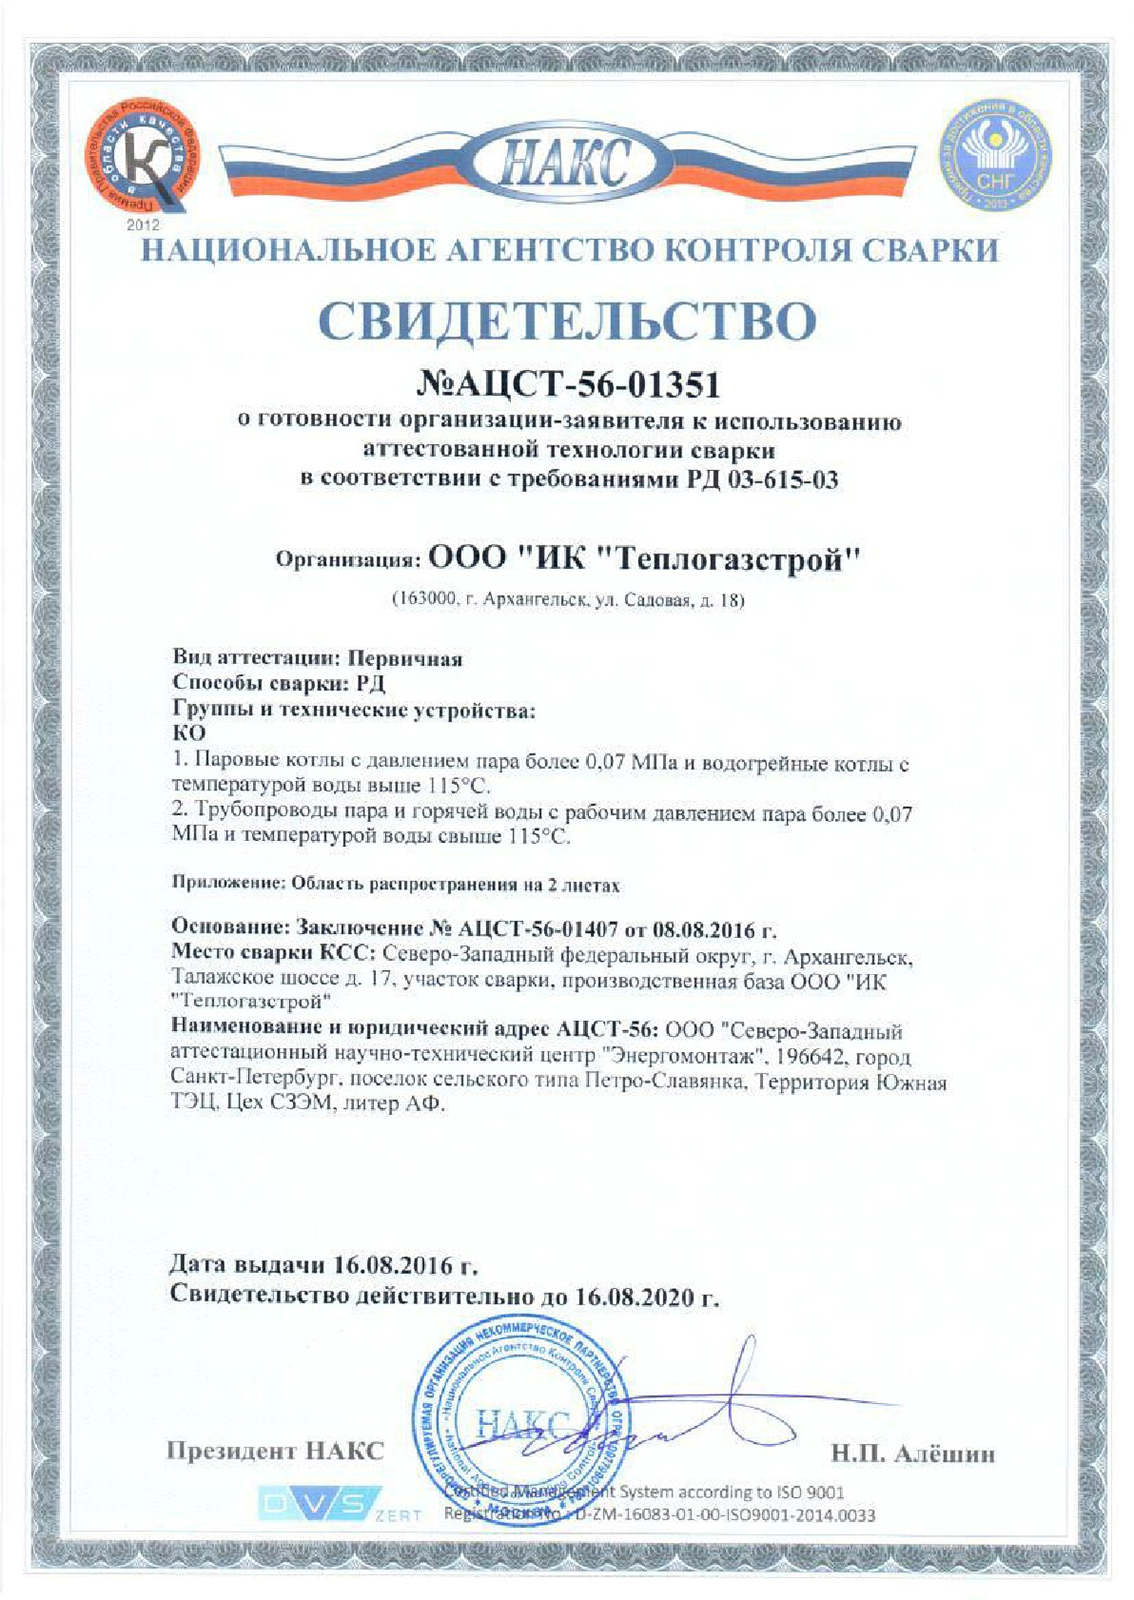 Certificate of readiness of the organization for the use of certified welding technology